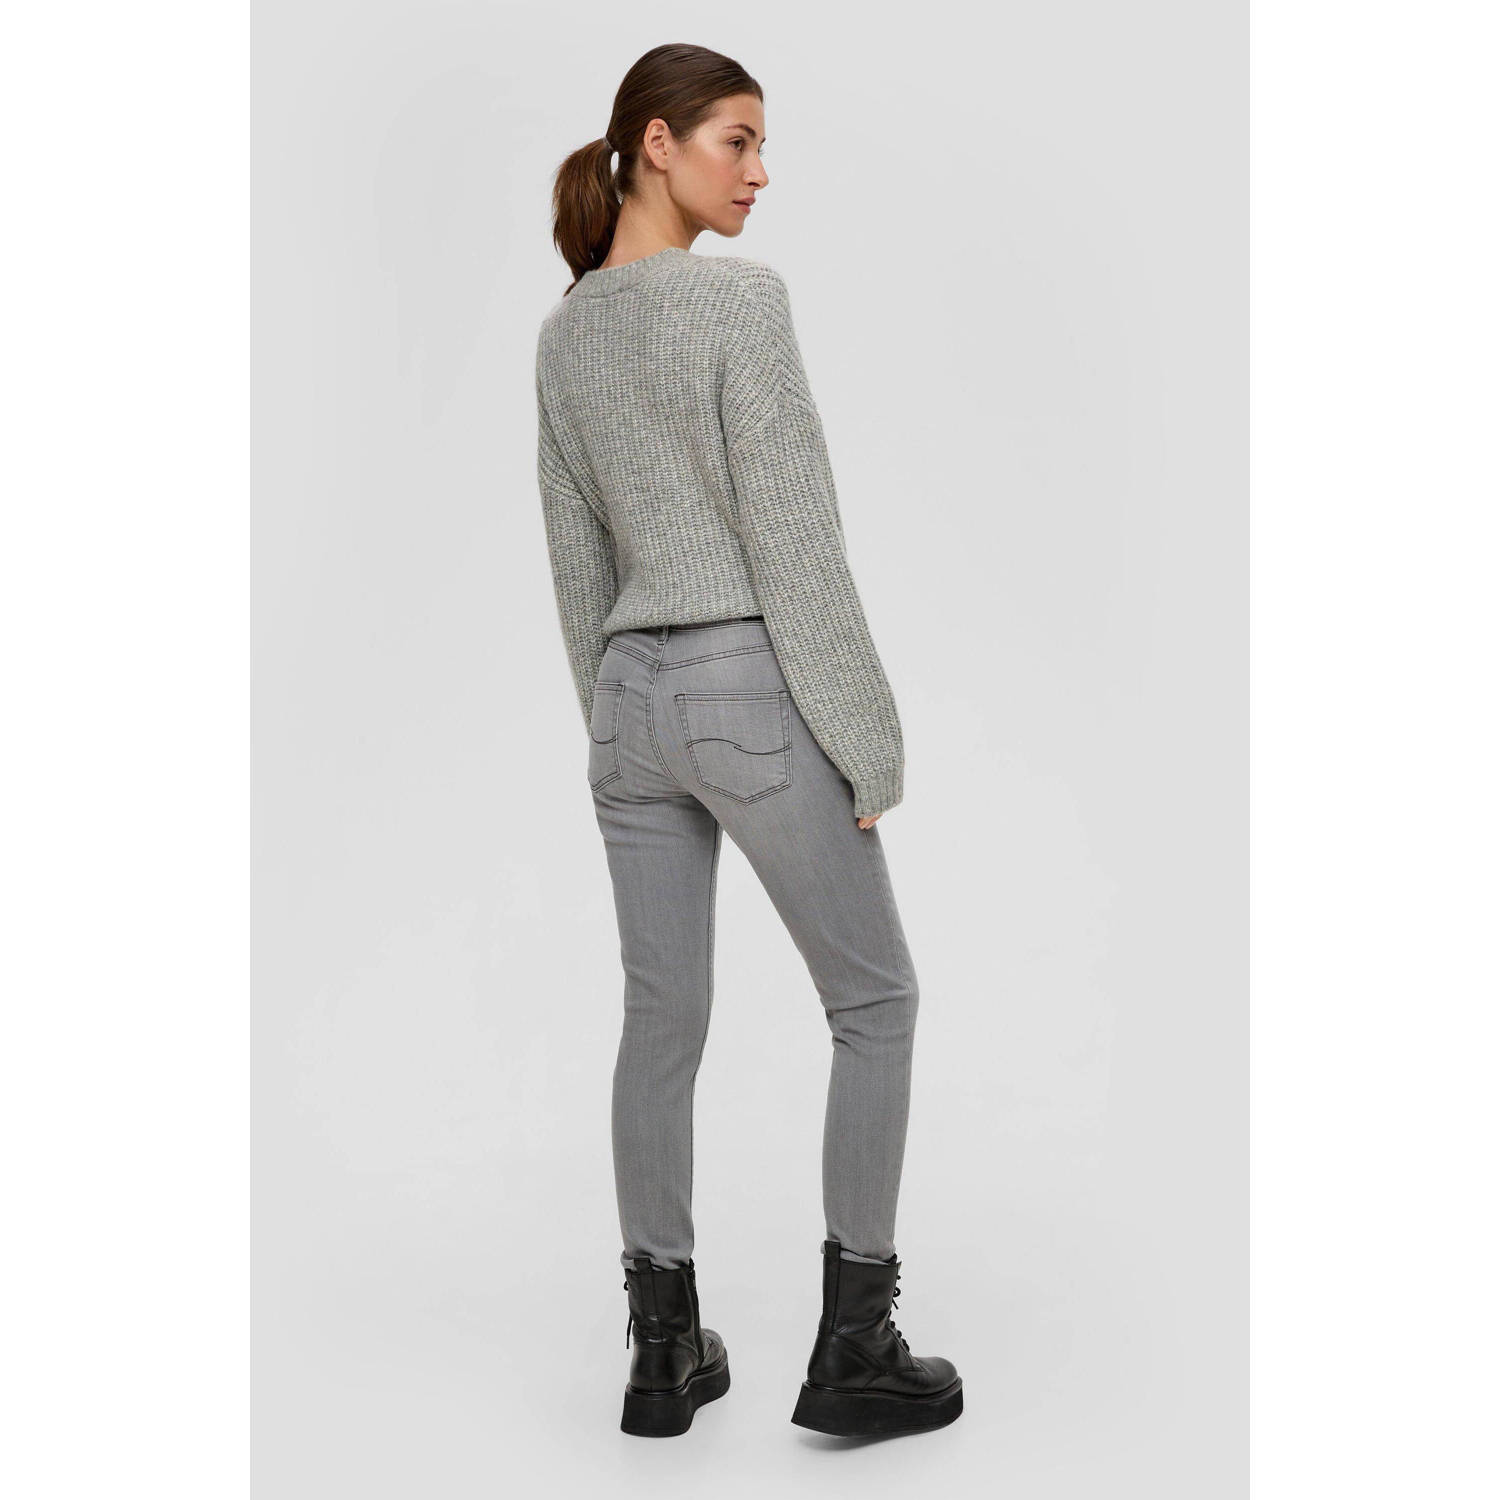 Q S by s.Oliver skinny jeans antraciet